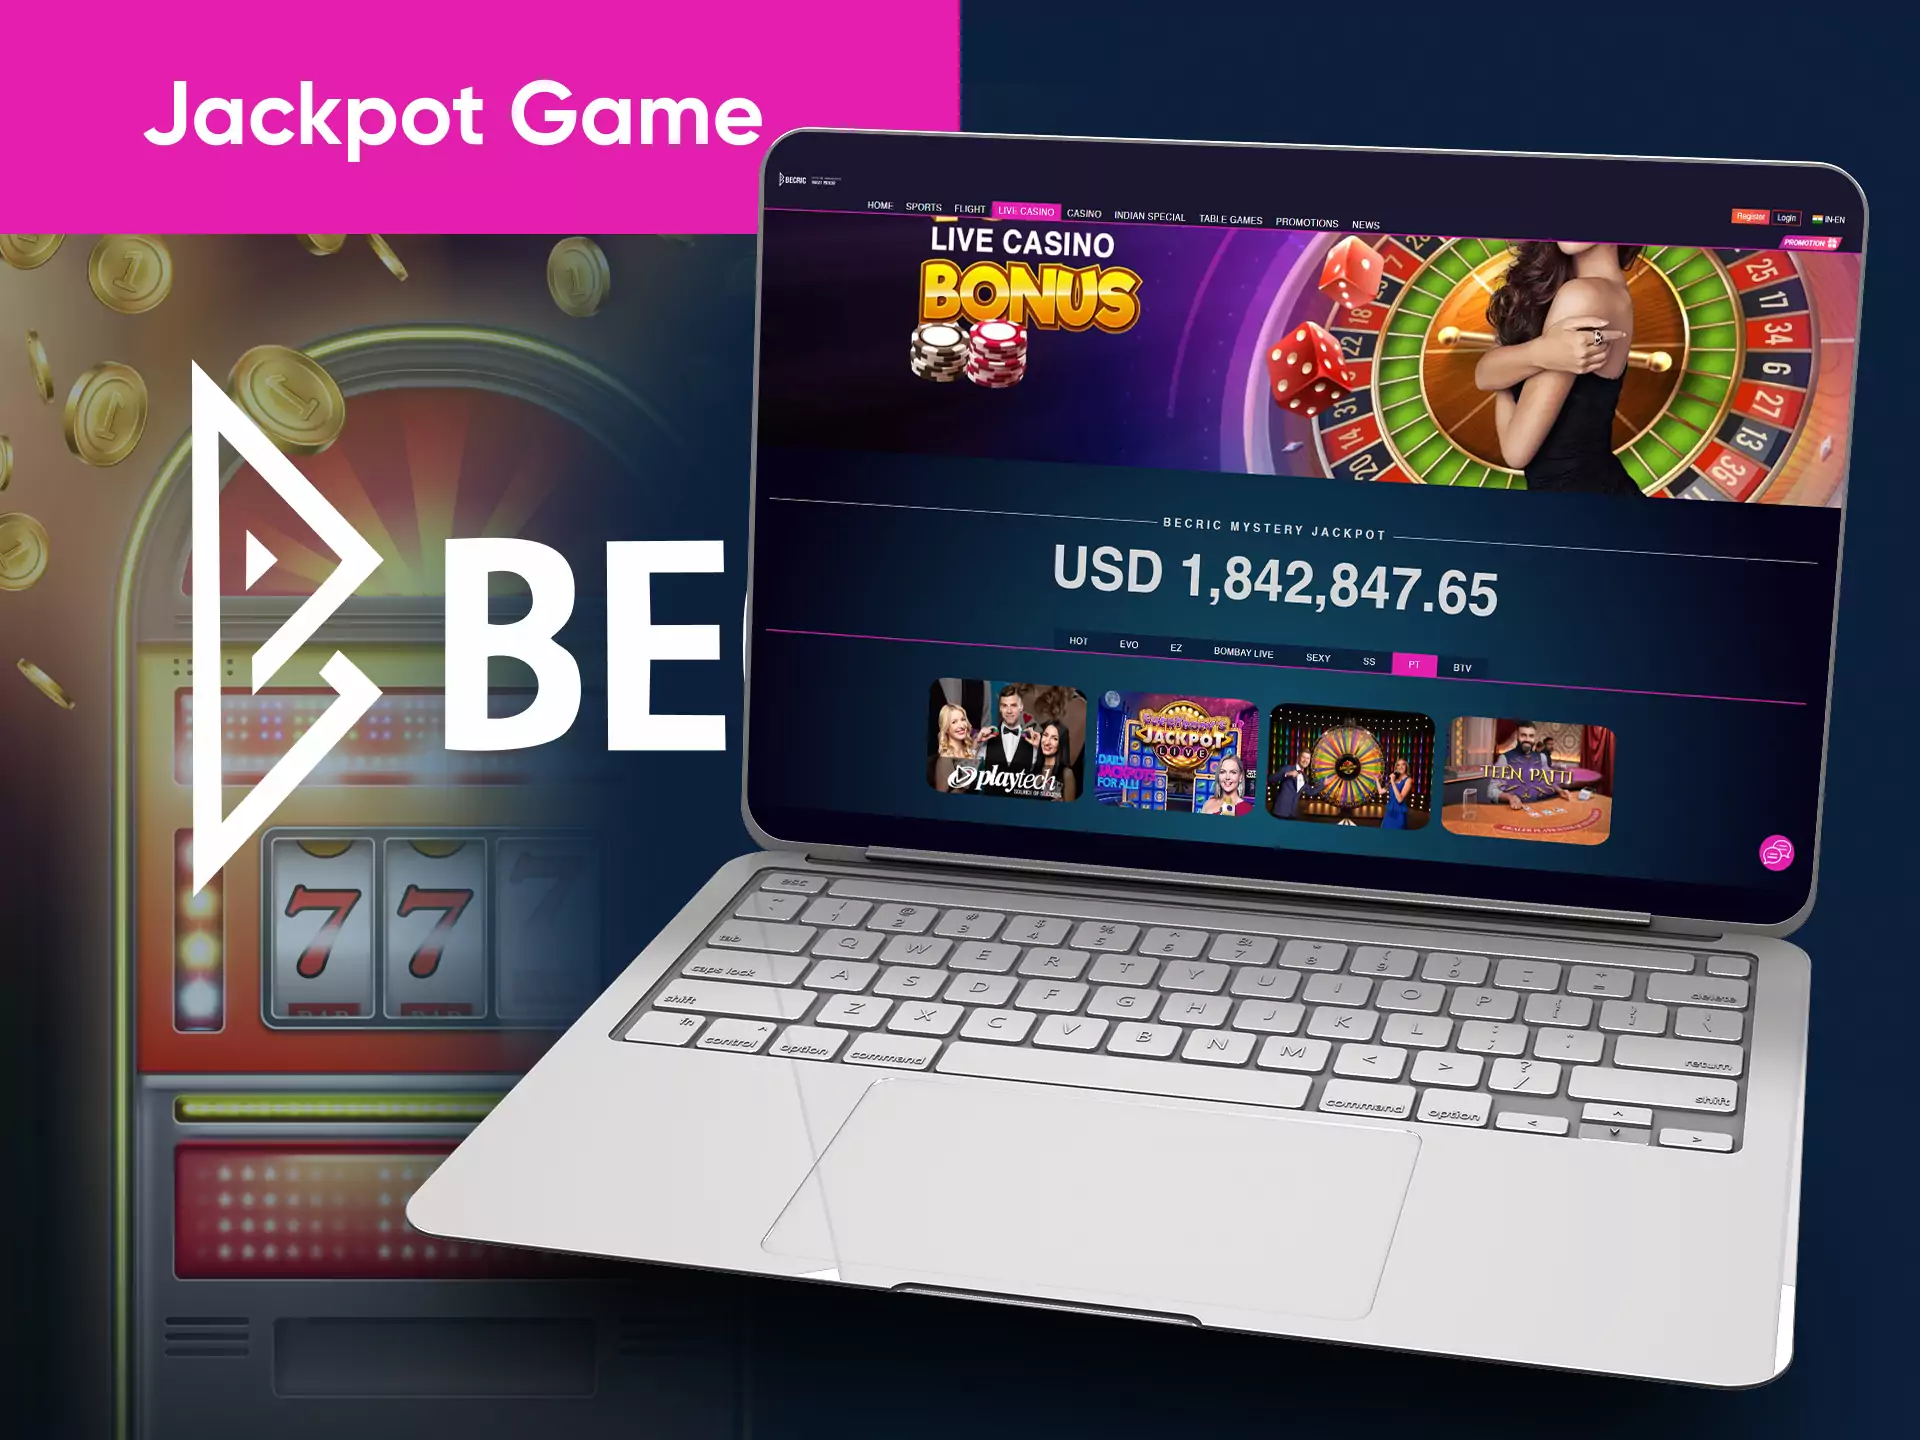 In the Becric Casino, you can win a fortune in a jackpot game.